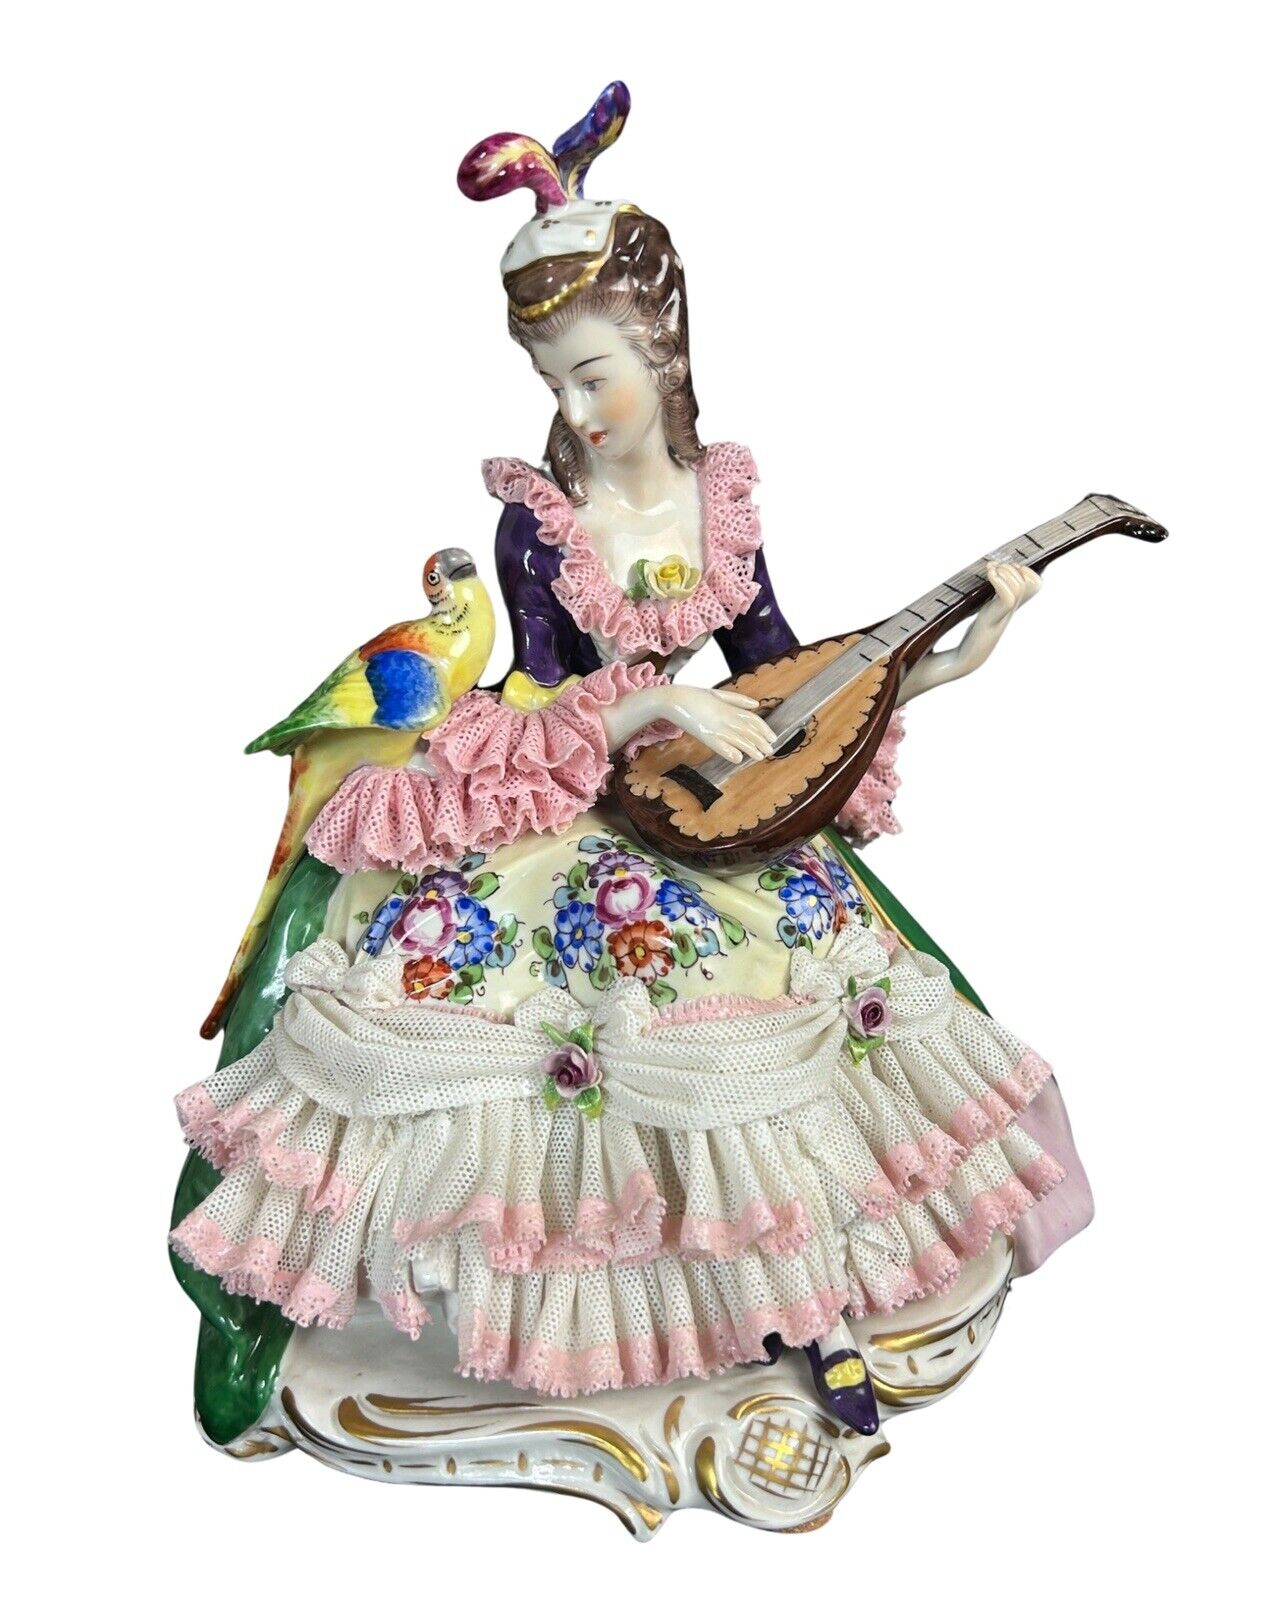 Vintage Dresden Lace Volkstedt Figurine Woman With Parrot & Mandolin 9.5”